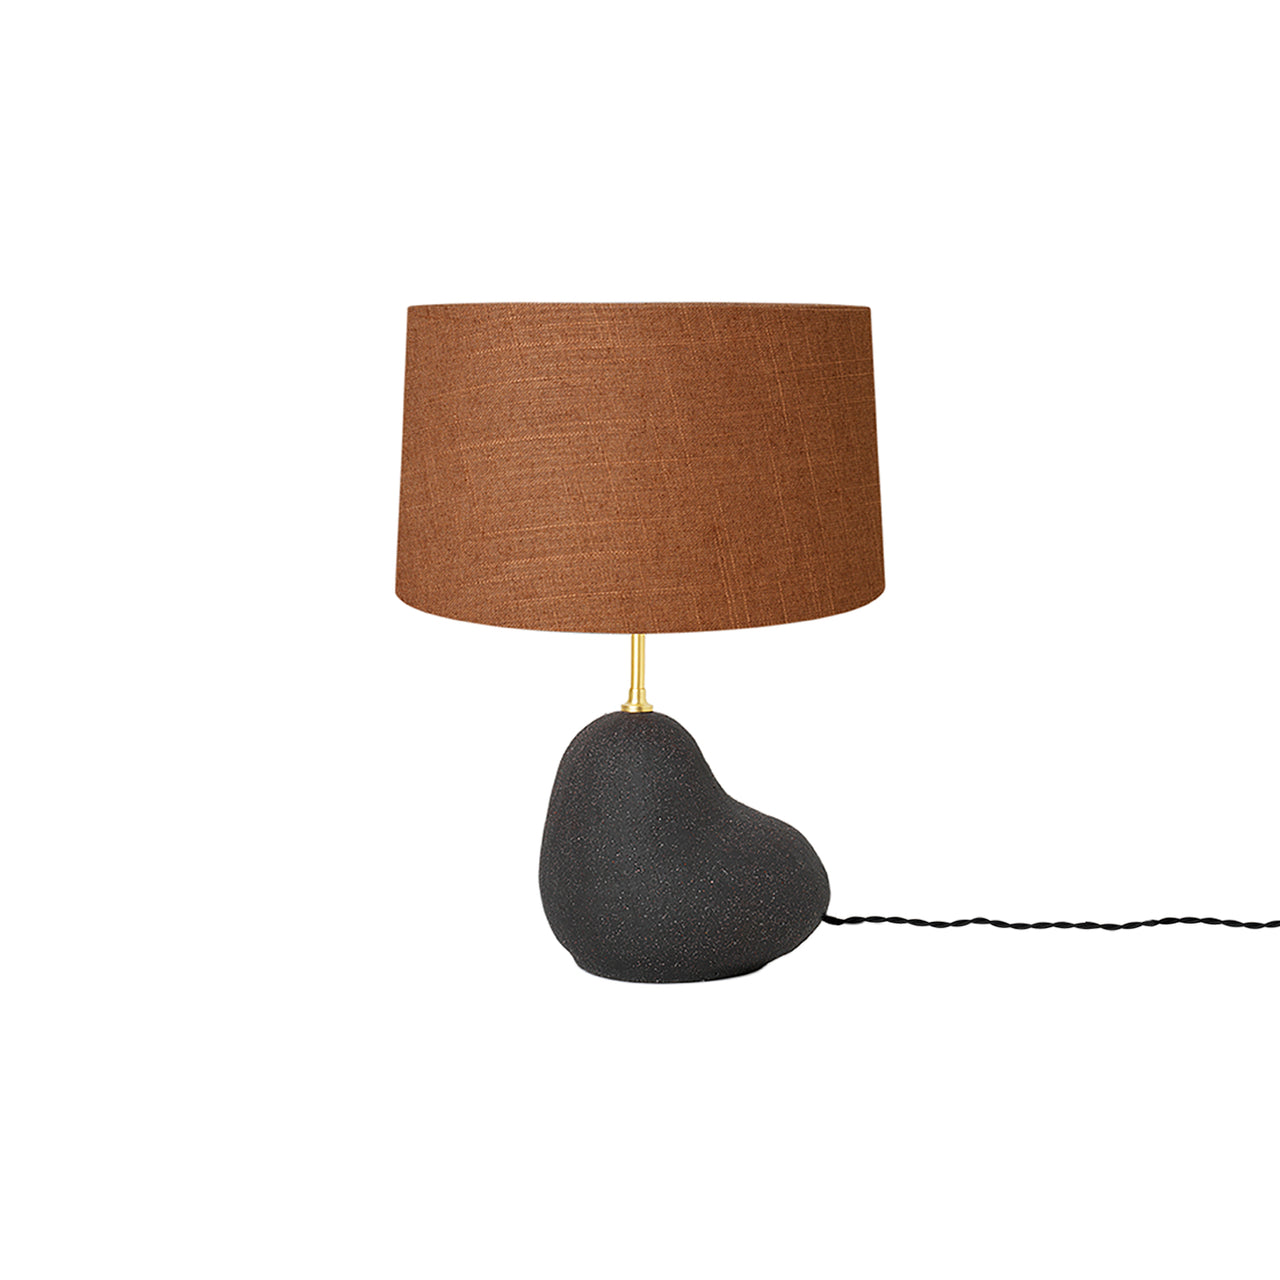 Hebe Lamp: Extra Small + Curry + Black